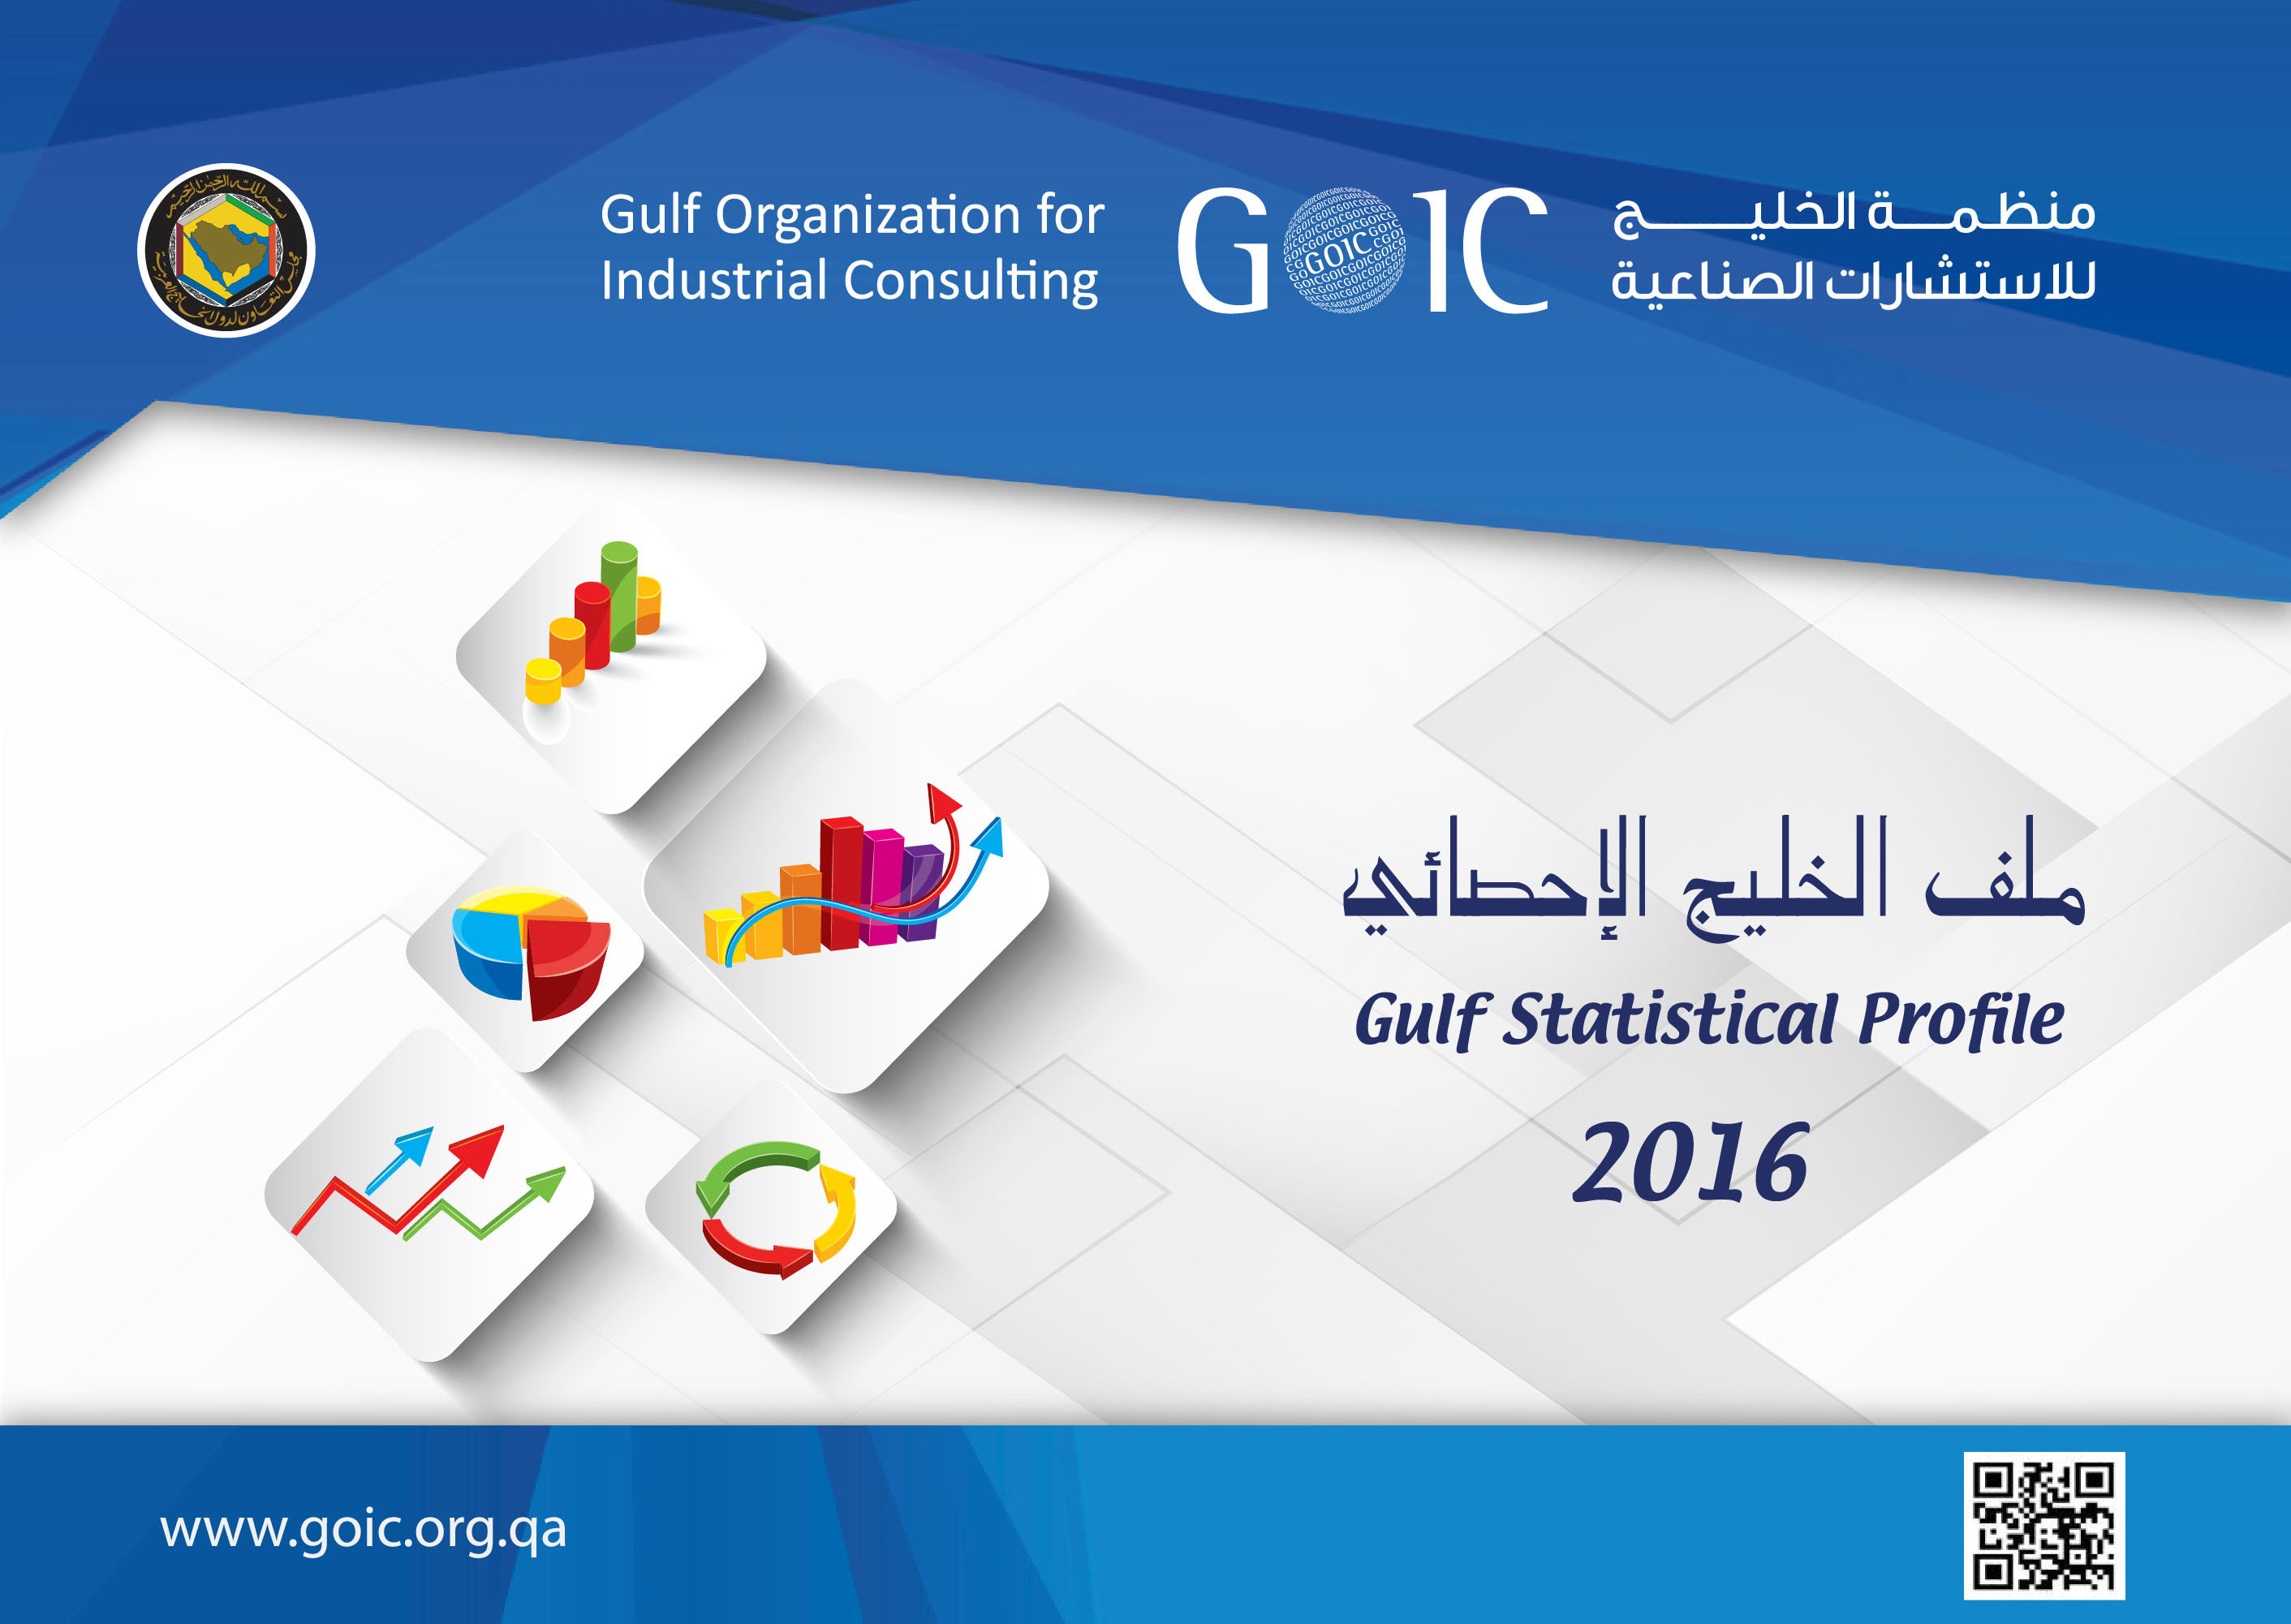 Gulf statistical profile 2016: latest reports issued by the 